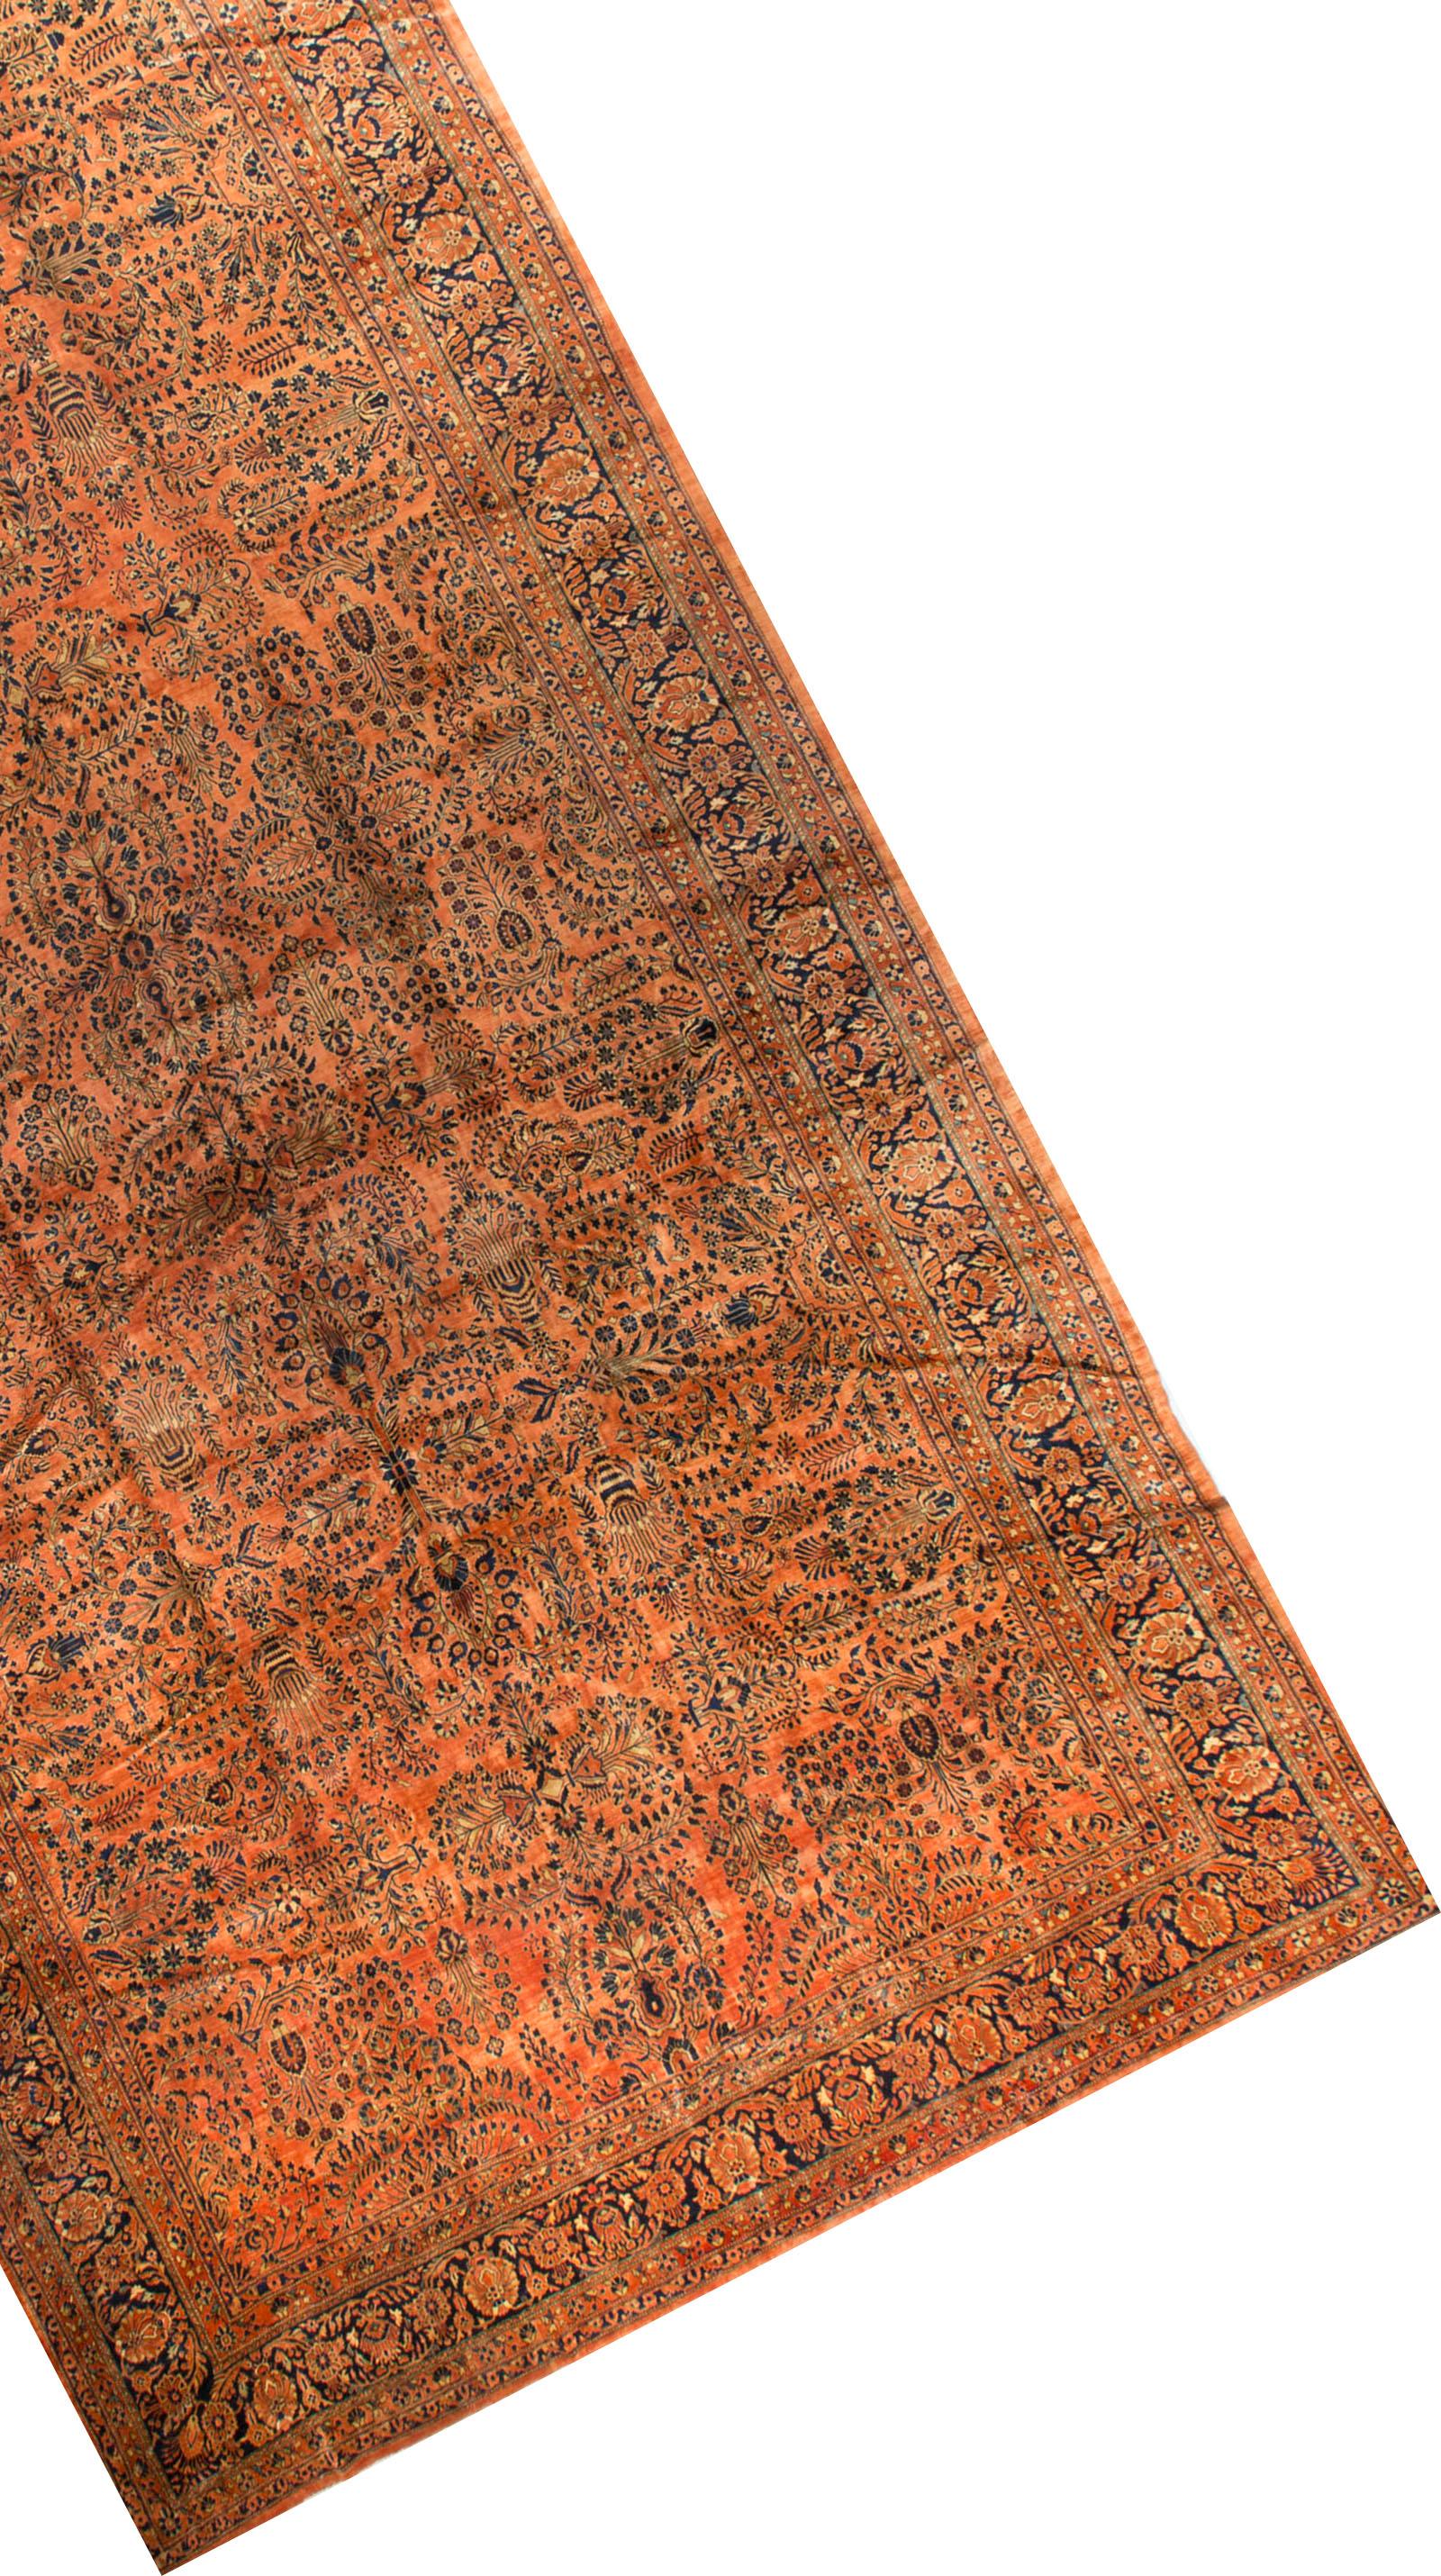 Hand-Woven Vintage Oversize Persian Sarouk Rug Gallery Size, circa 1930 For Sale